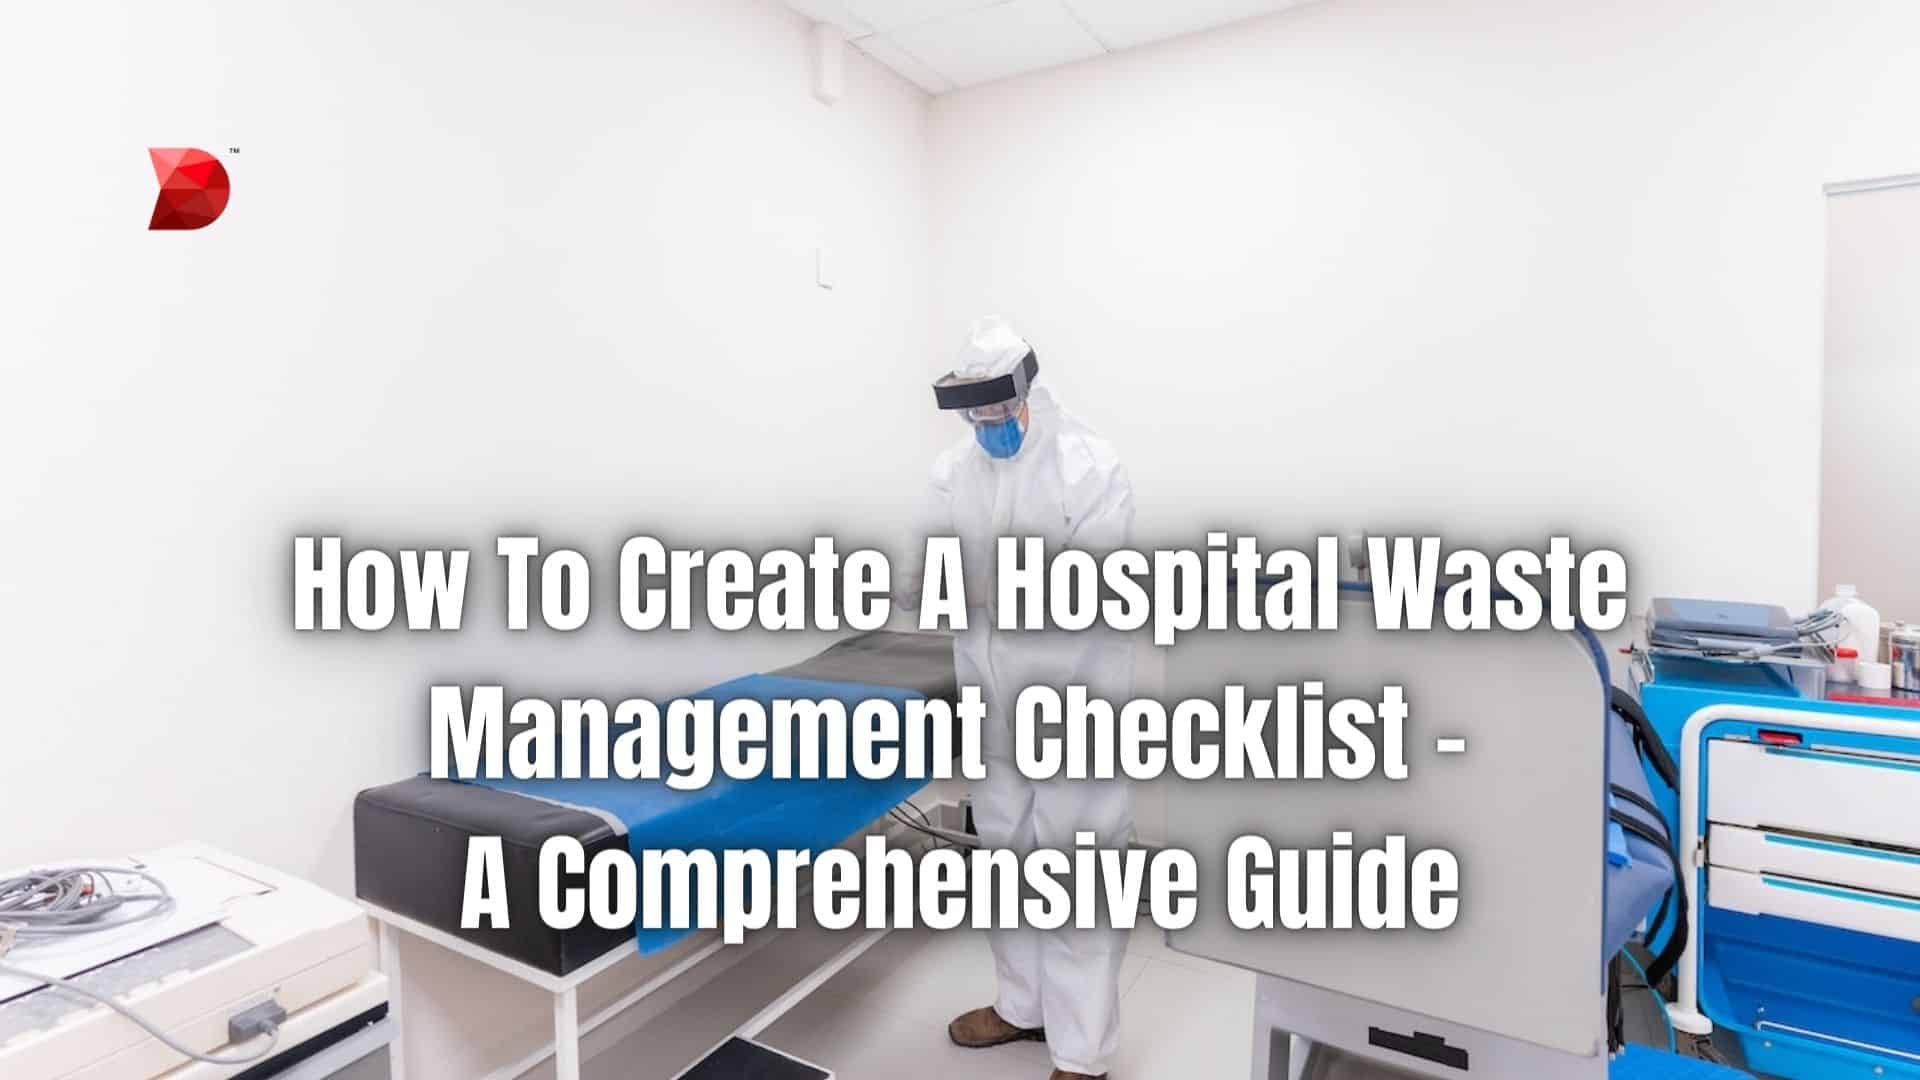 How To Create A Hospital Waste Management Checklist - A Comprehensive Guide